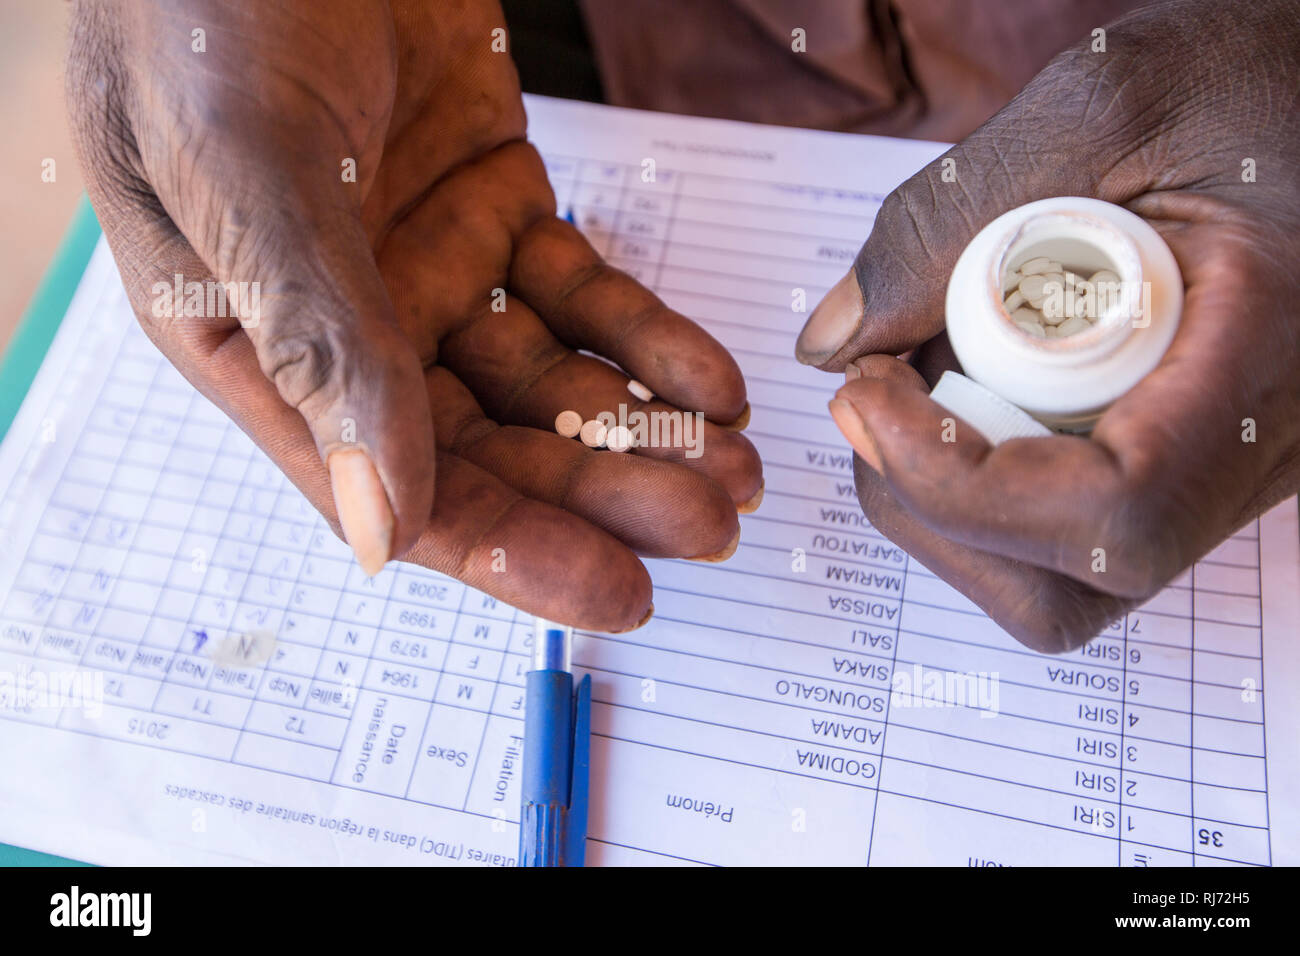 Bodadiougou village, Banfora, Cascades Region, Burkina Faso, 4th December 2016; Distribution of Ivermectin. Accurate record keeping is essential. This is part of the programme  to prevent River Blindness in the region. Stock Photo